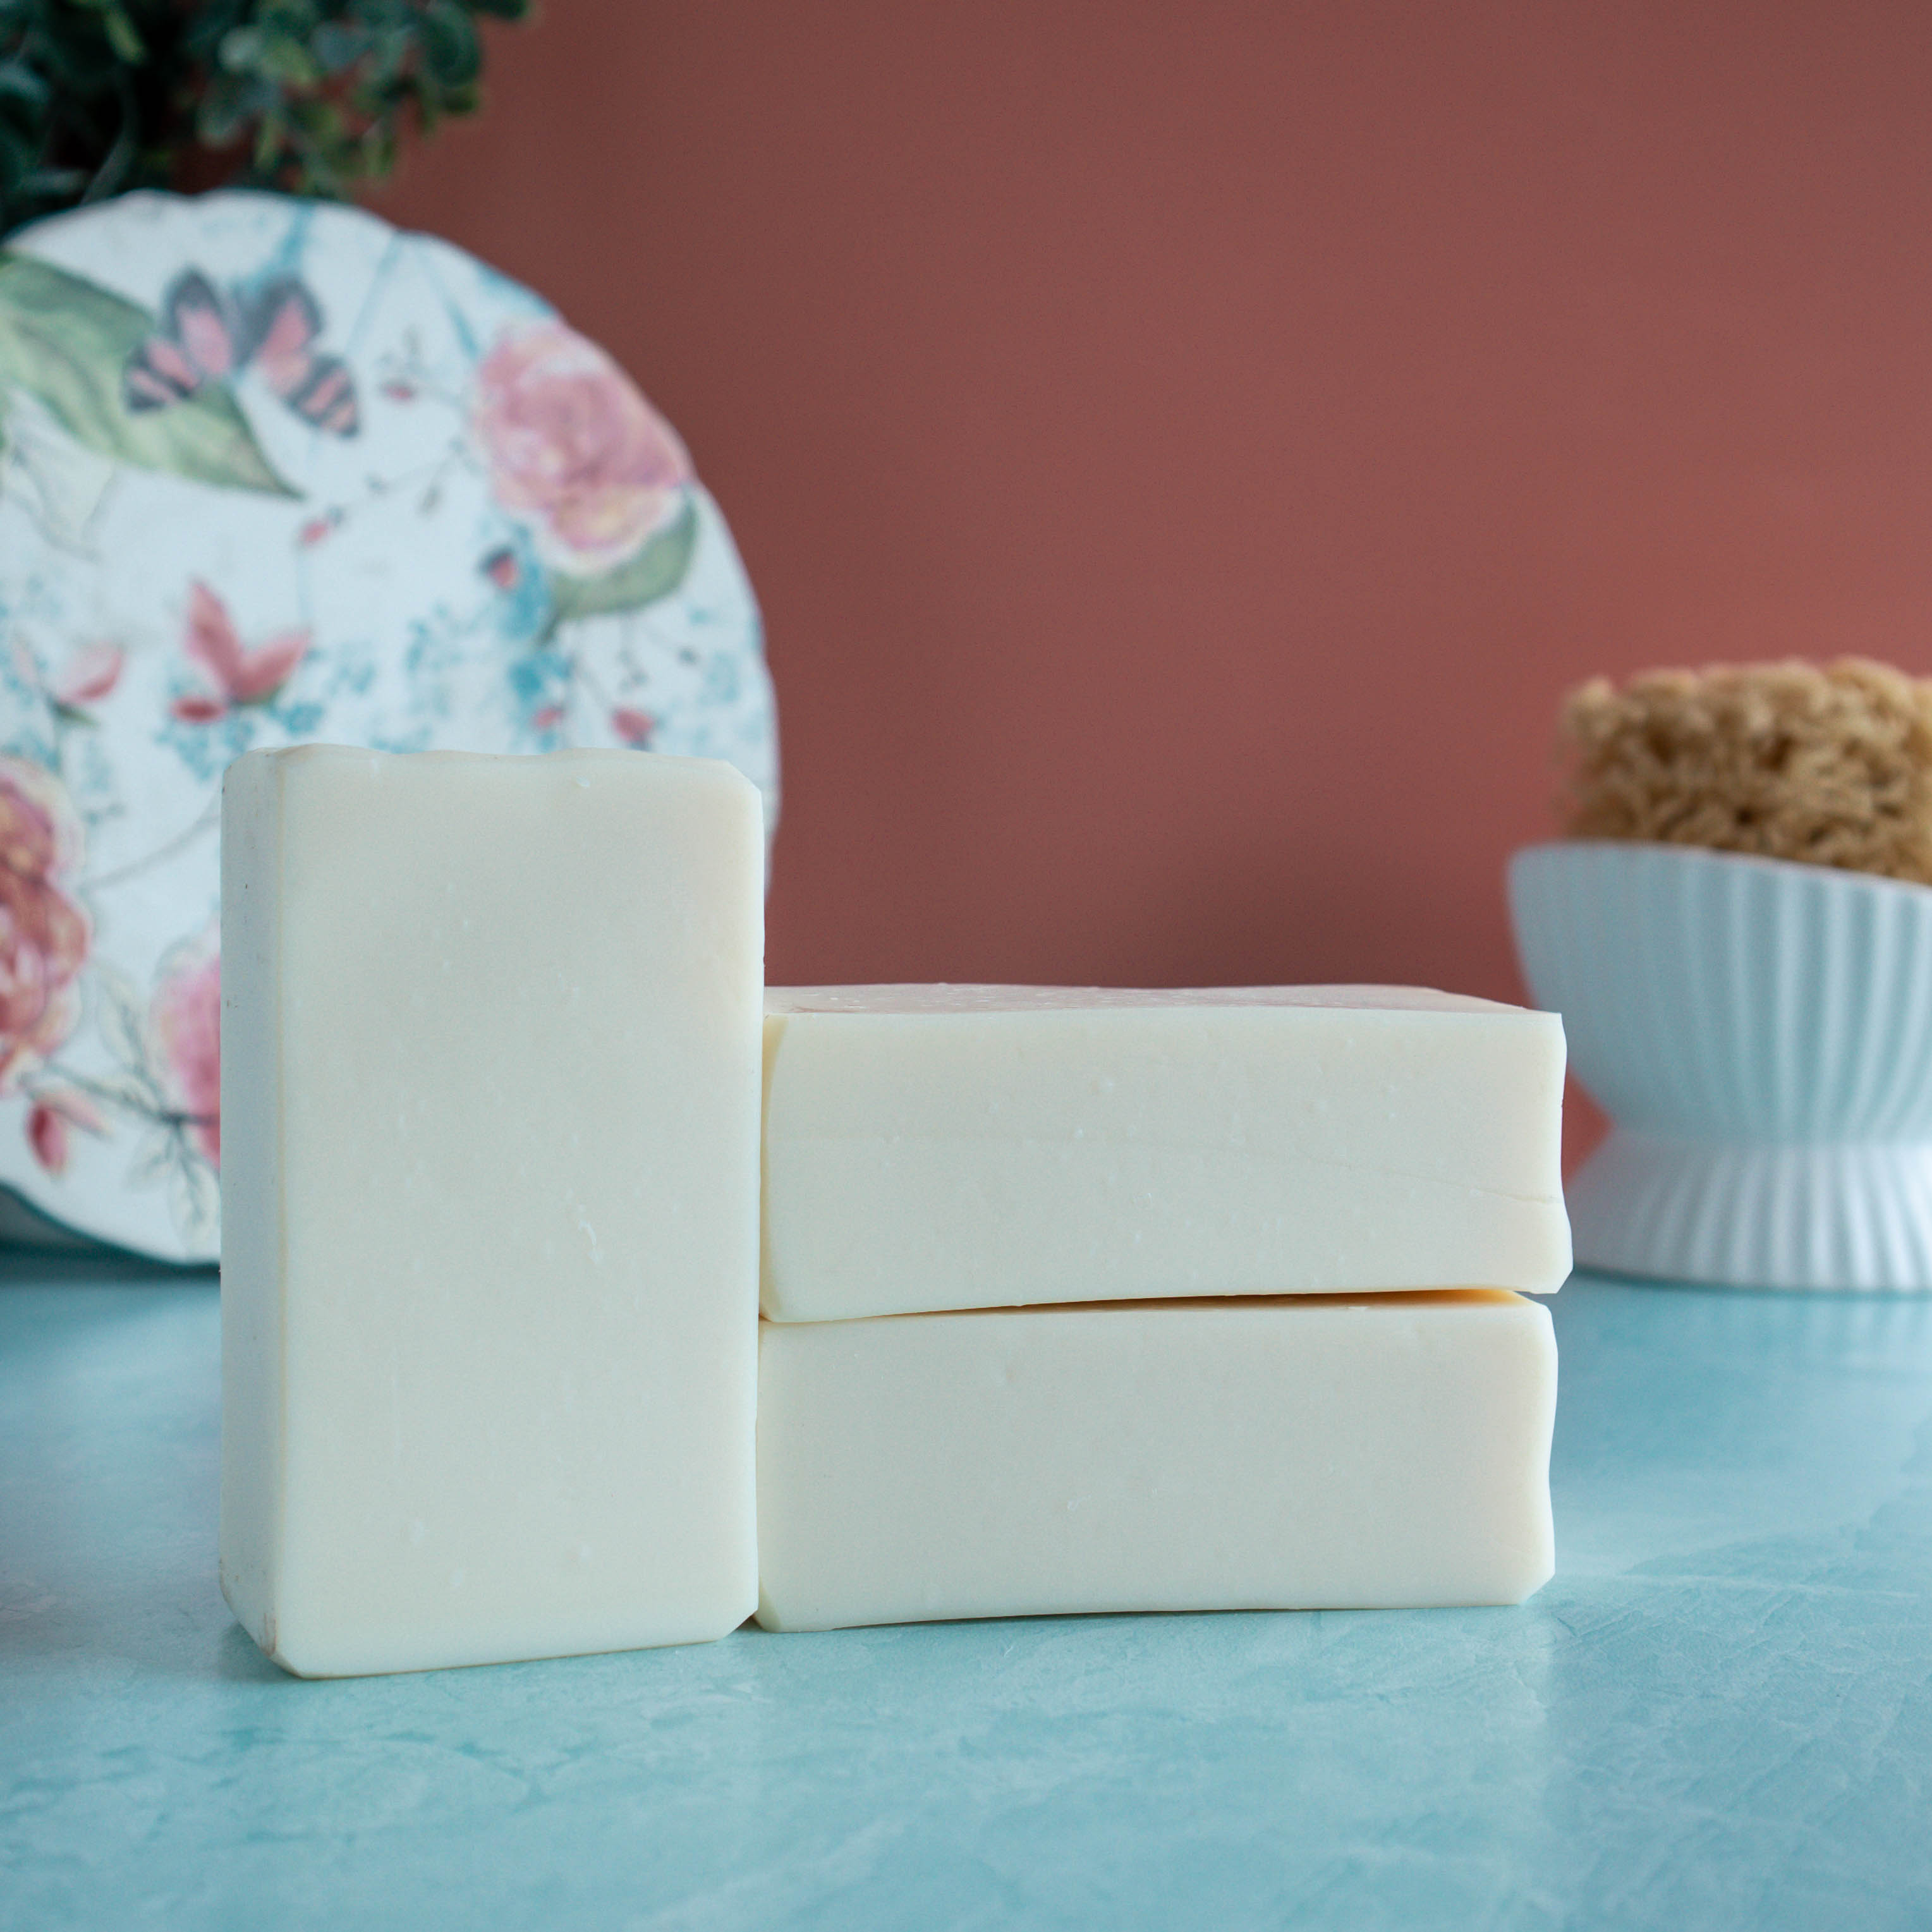 3 bars of creamy white soap are in the foreground, 2 stacked on top of each other. there is a pretty floral plate in the back left corner and a sponge in a white dish in the back right. The background is a lovely coral color and a seafoam green base. 